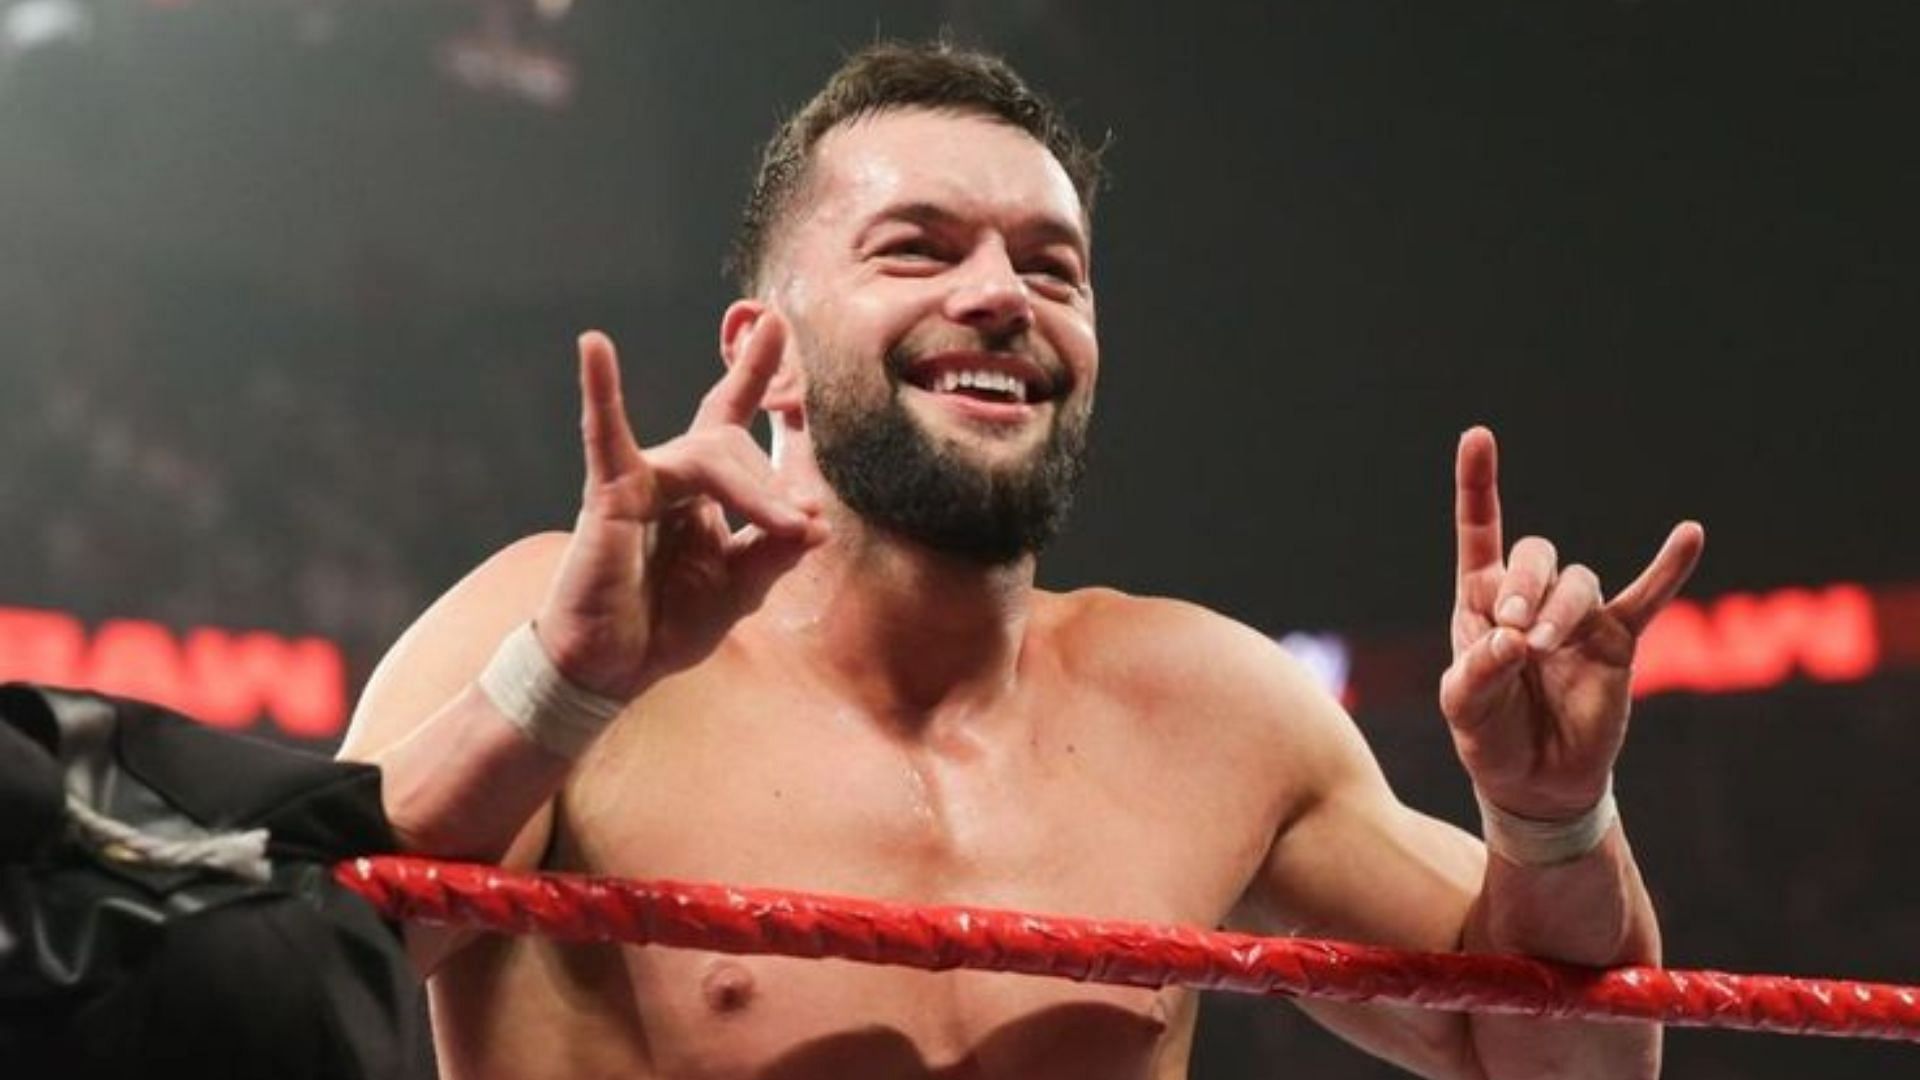 Finn Balor is currently a member of The Judgment Day alongside Dominik Mysterio and co.